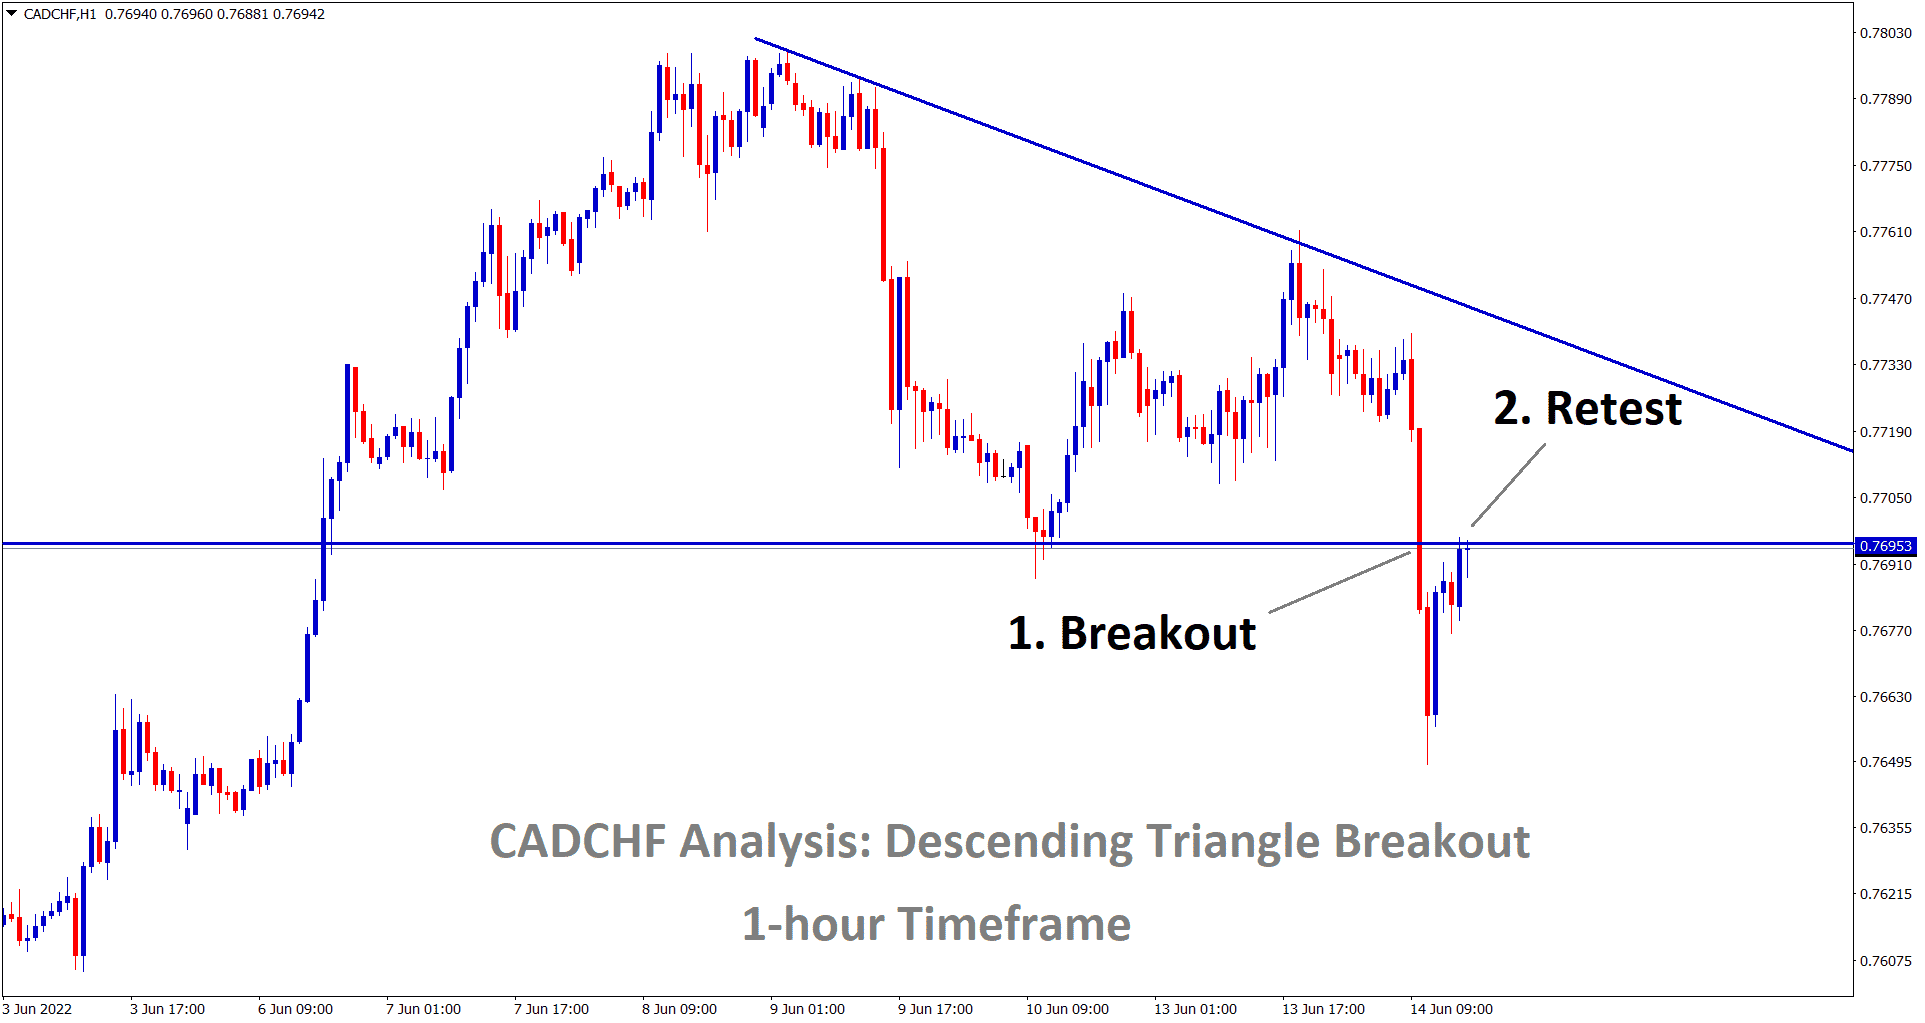 CADCHF is retesting the broken level of the descending triangle